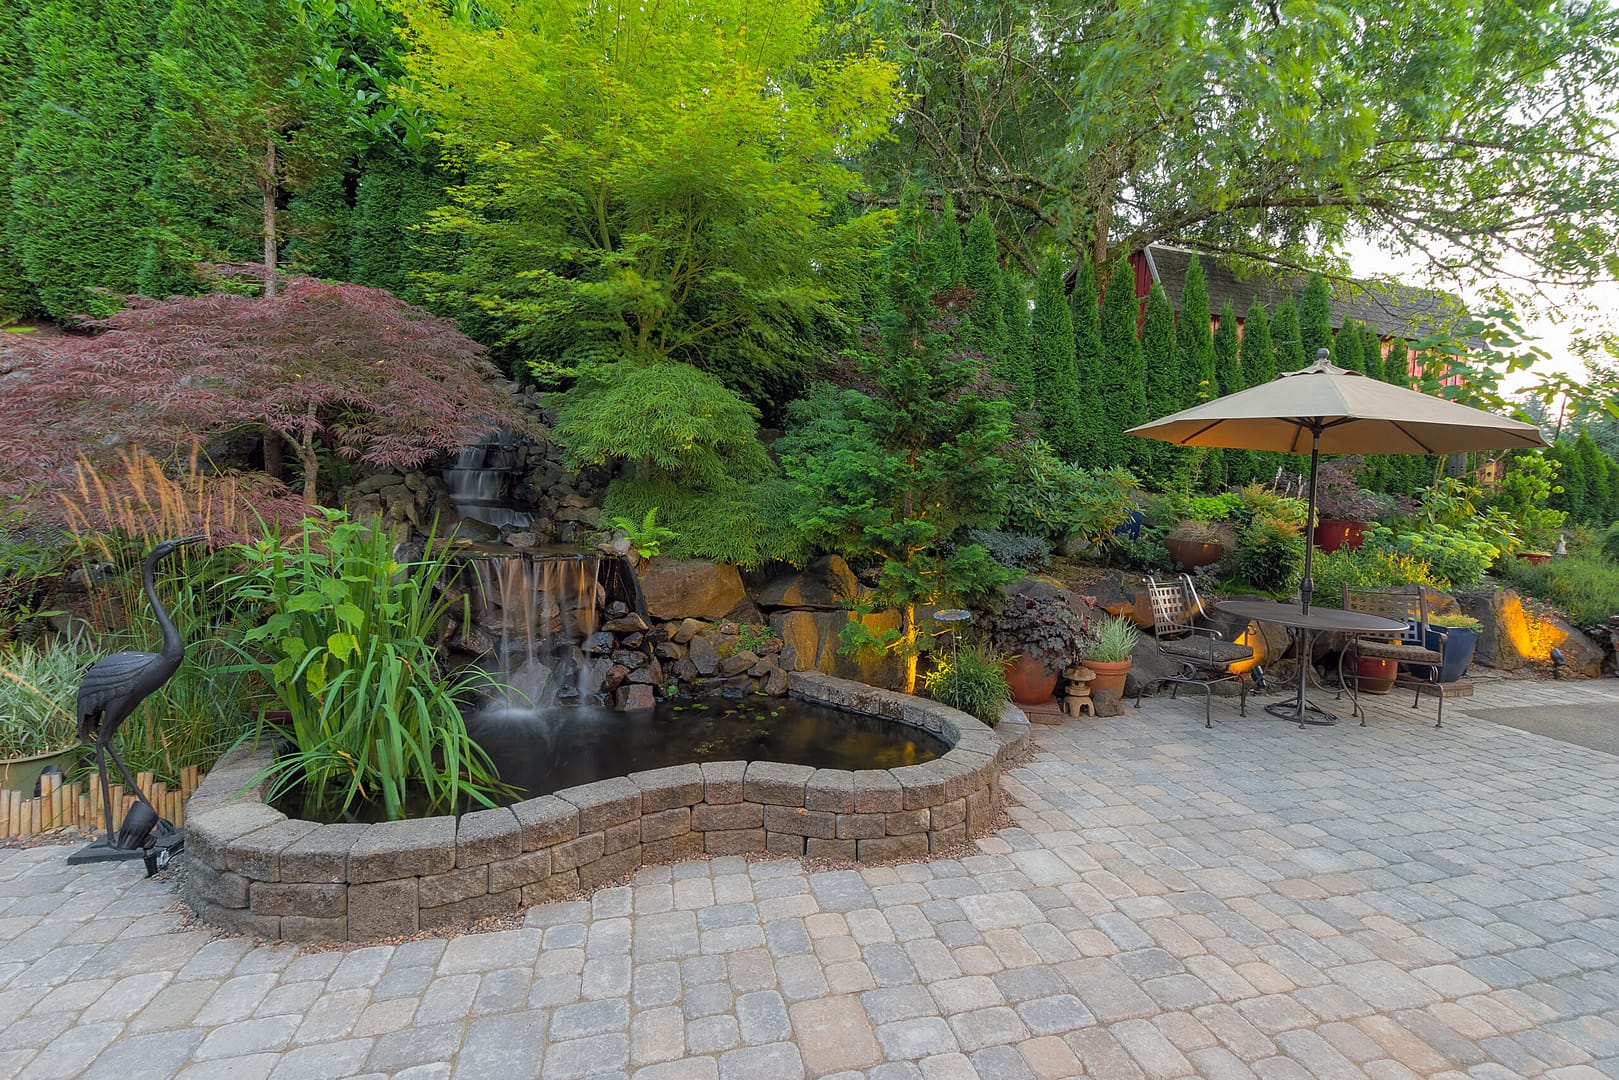 Serene backyard landscaping featuring a spacious patio surrounded by lush greenery and centered around a captivating waterfall pond.